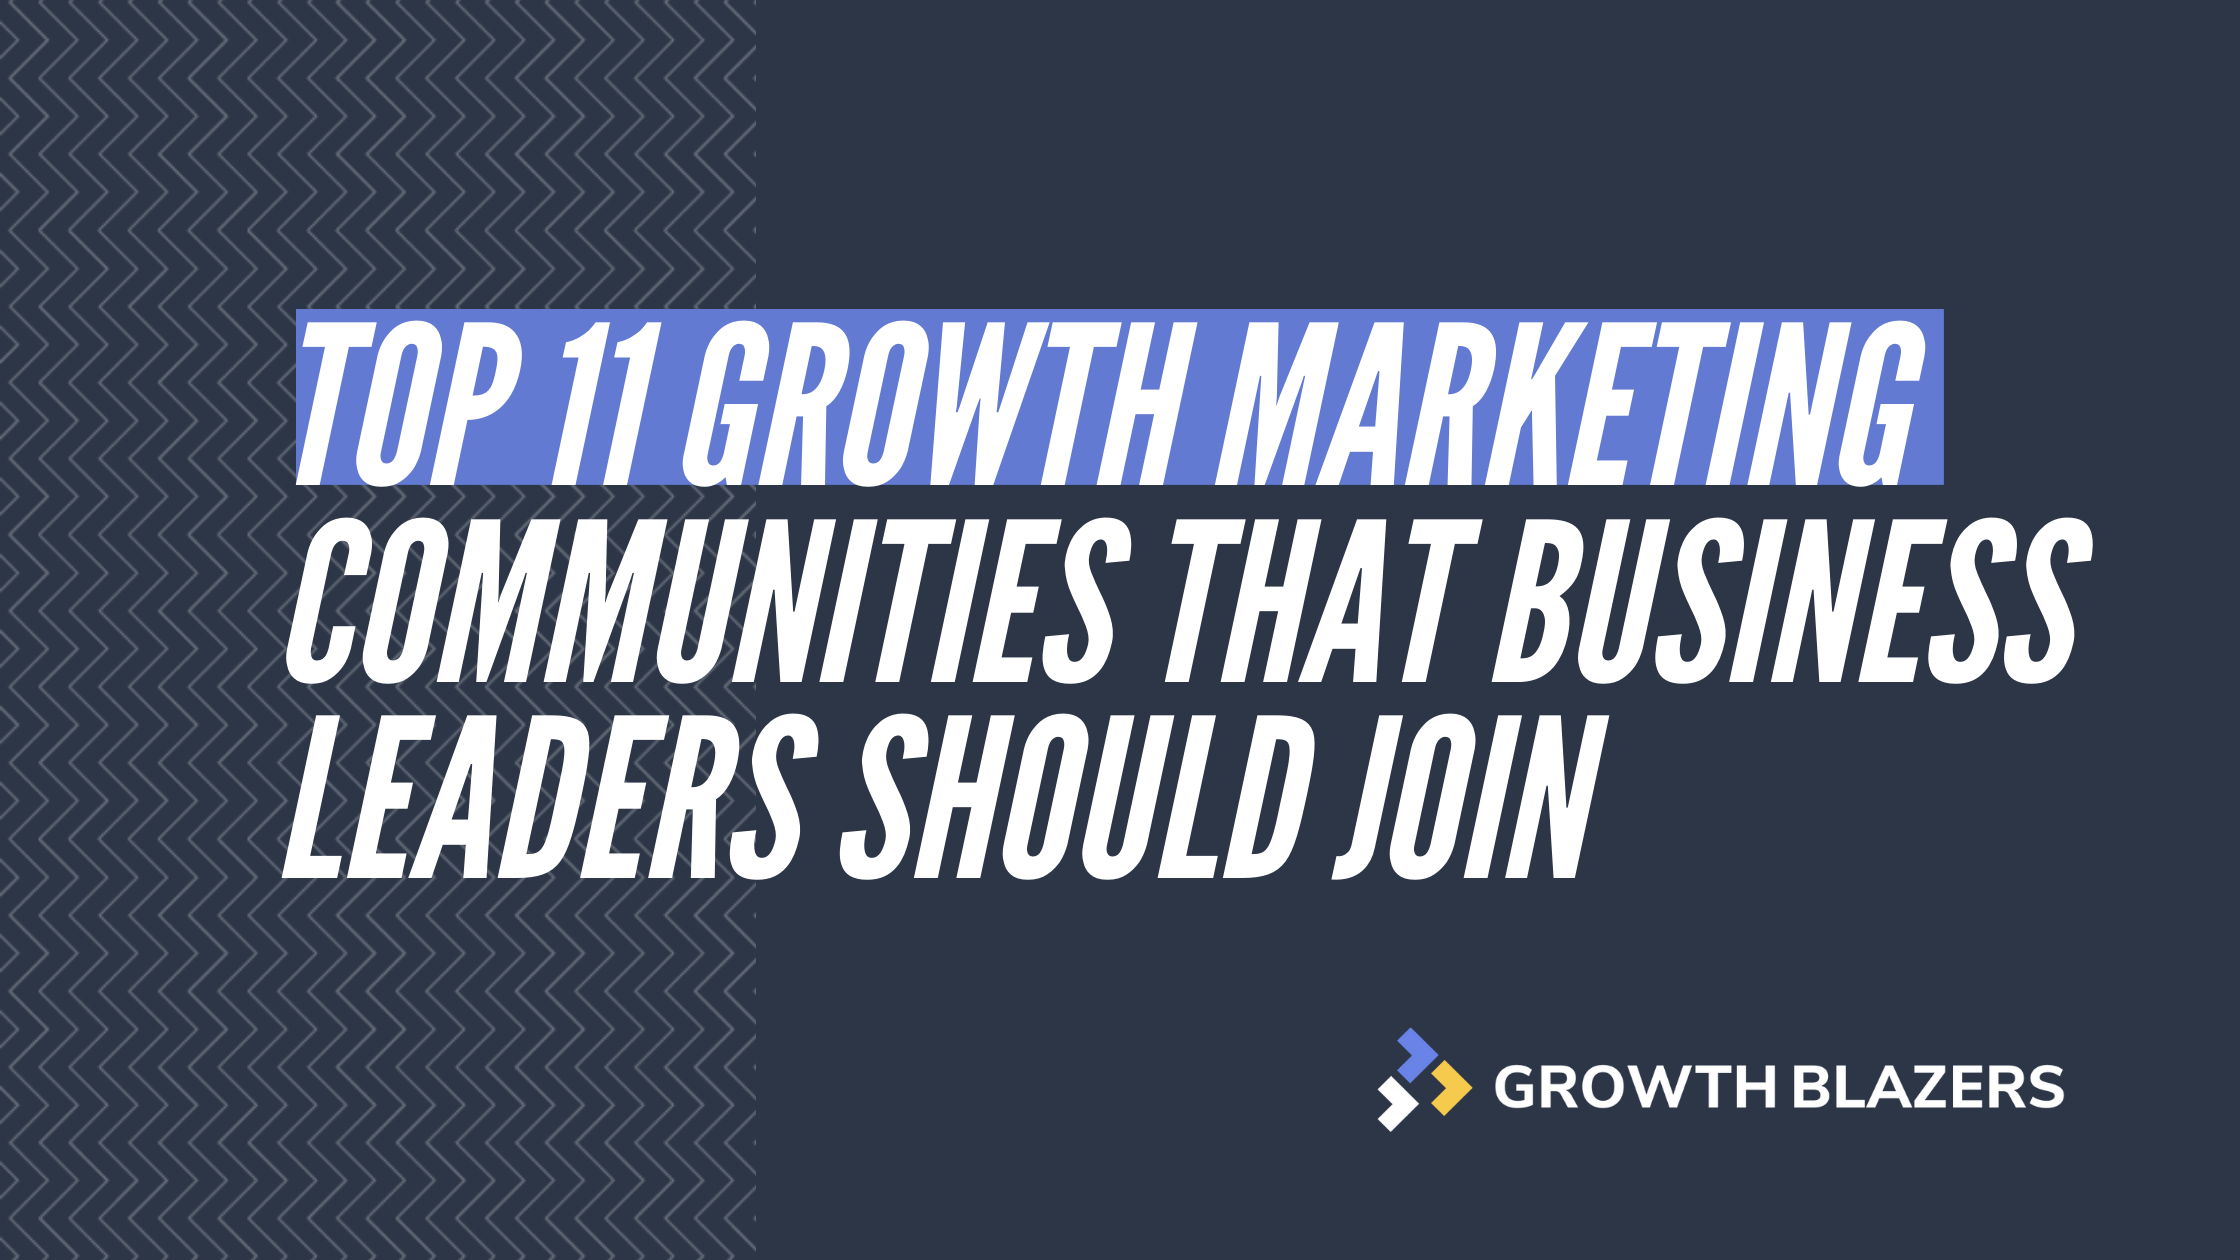 Top 11 Growth Marketing Communities that Business Leaders Should Join